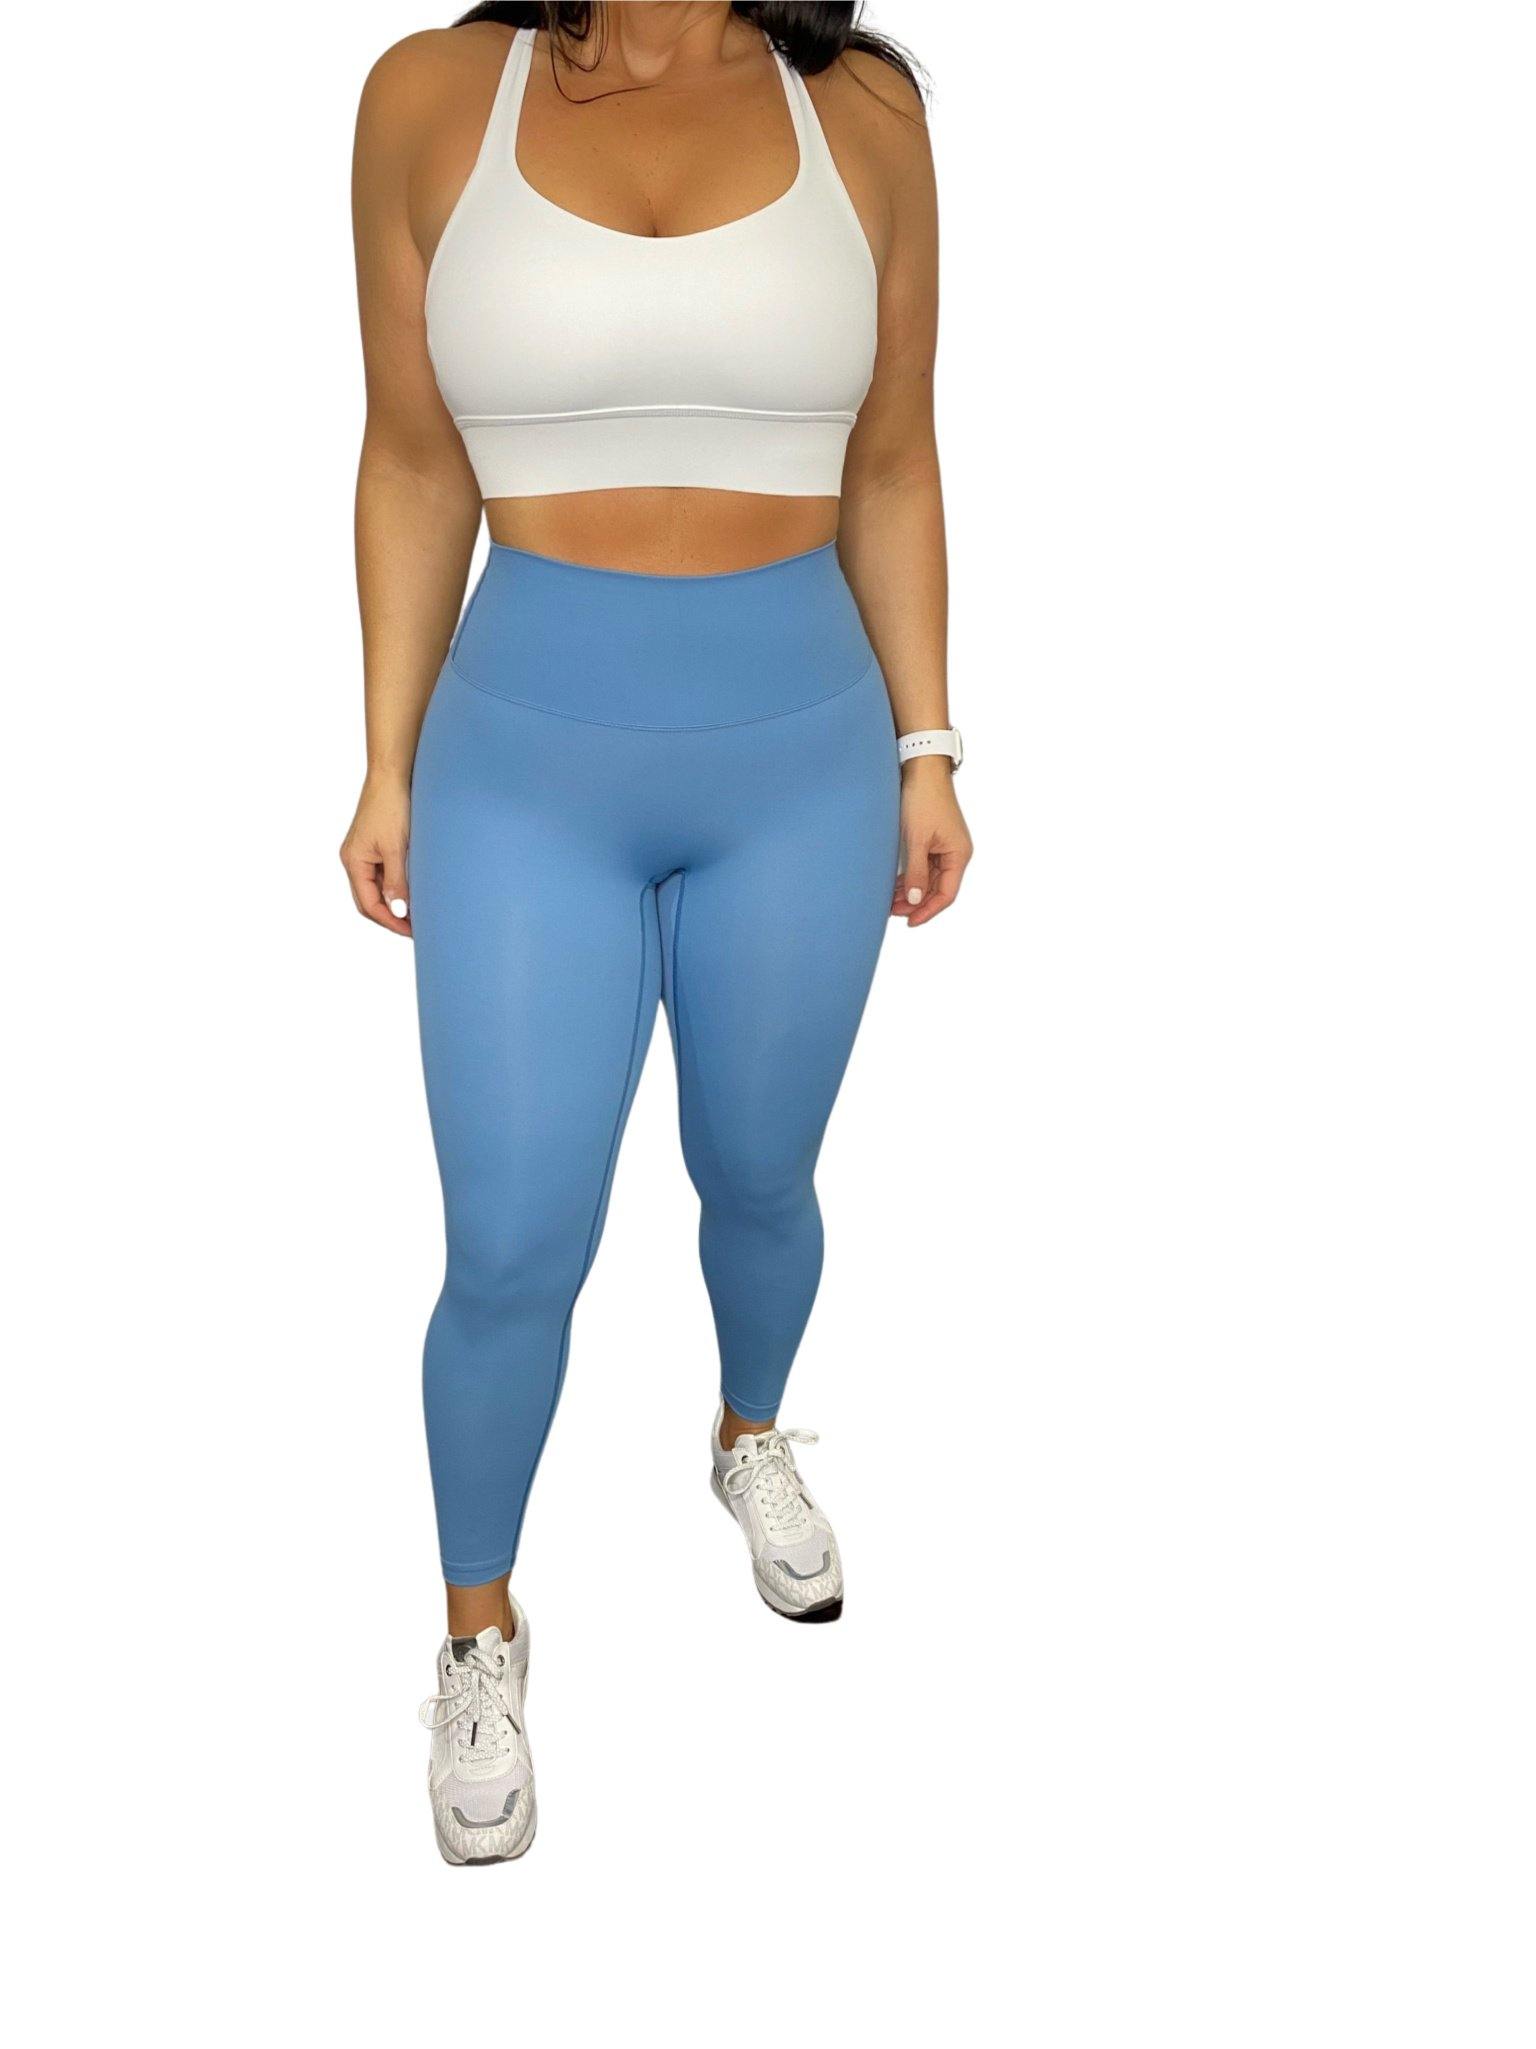 Experience Unmatched Comfort with our 'Like a Cloud' leggings